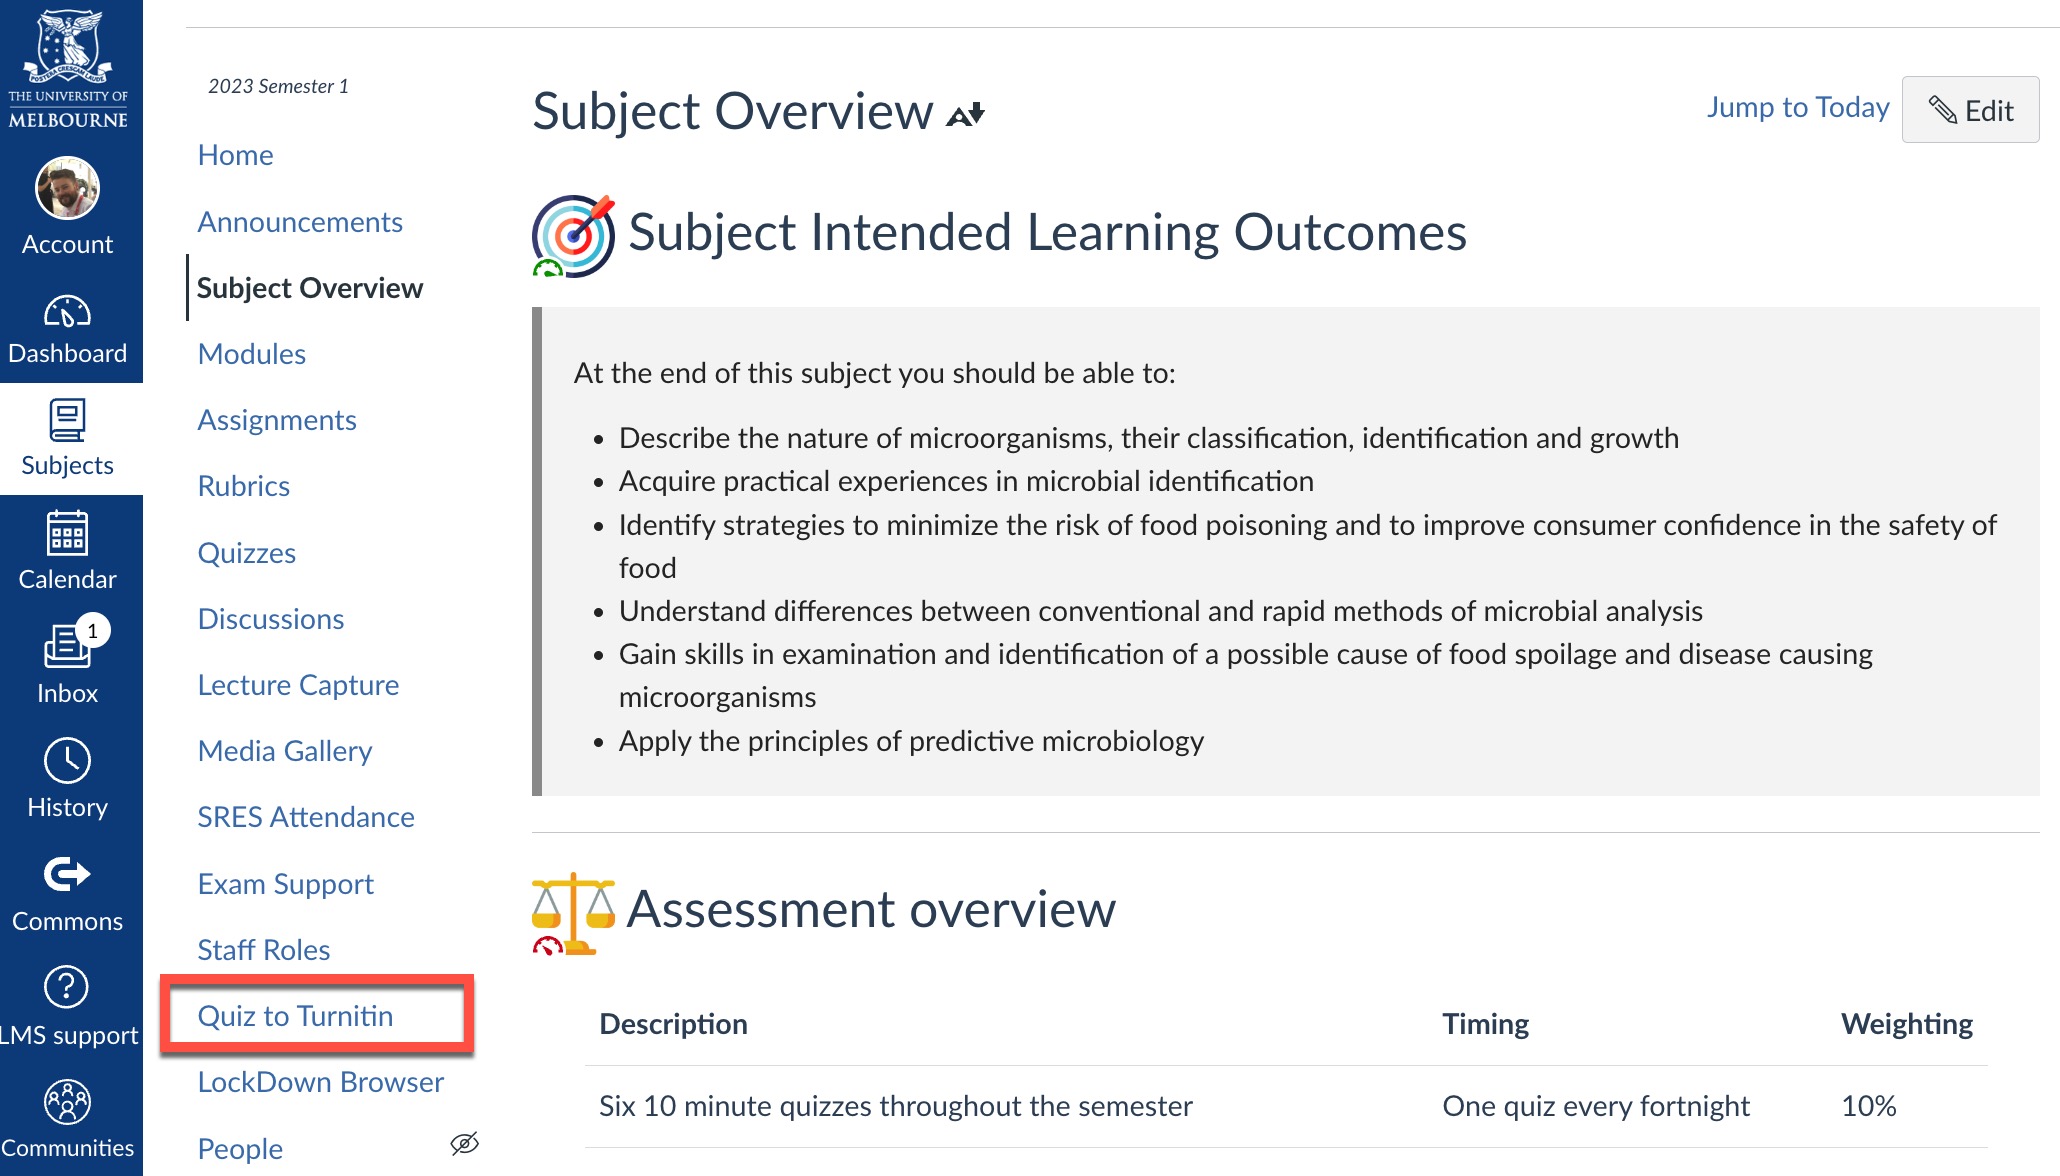 The Quiz to Turnitin tool in subject navigation menu once activated.